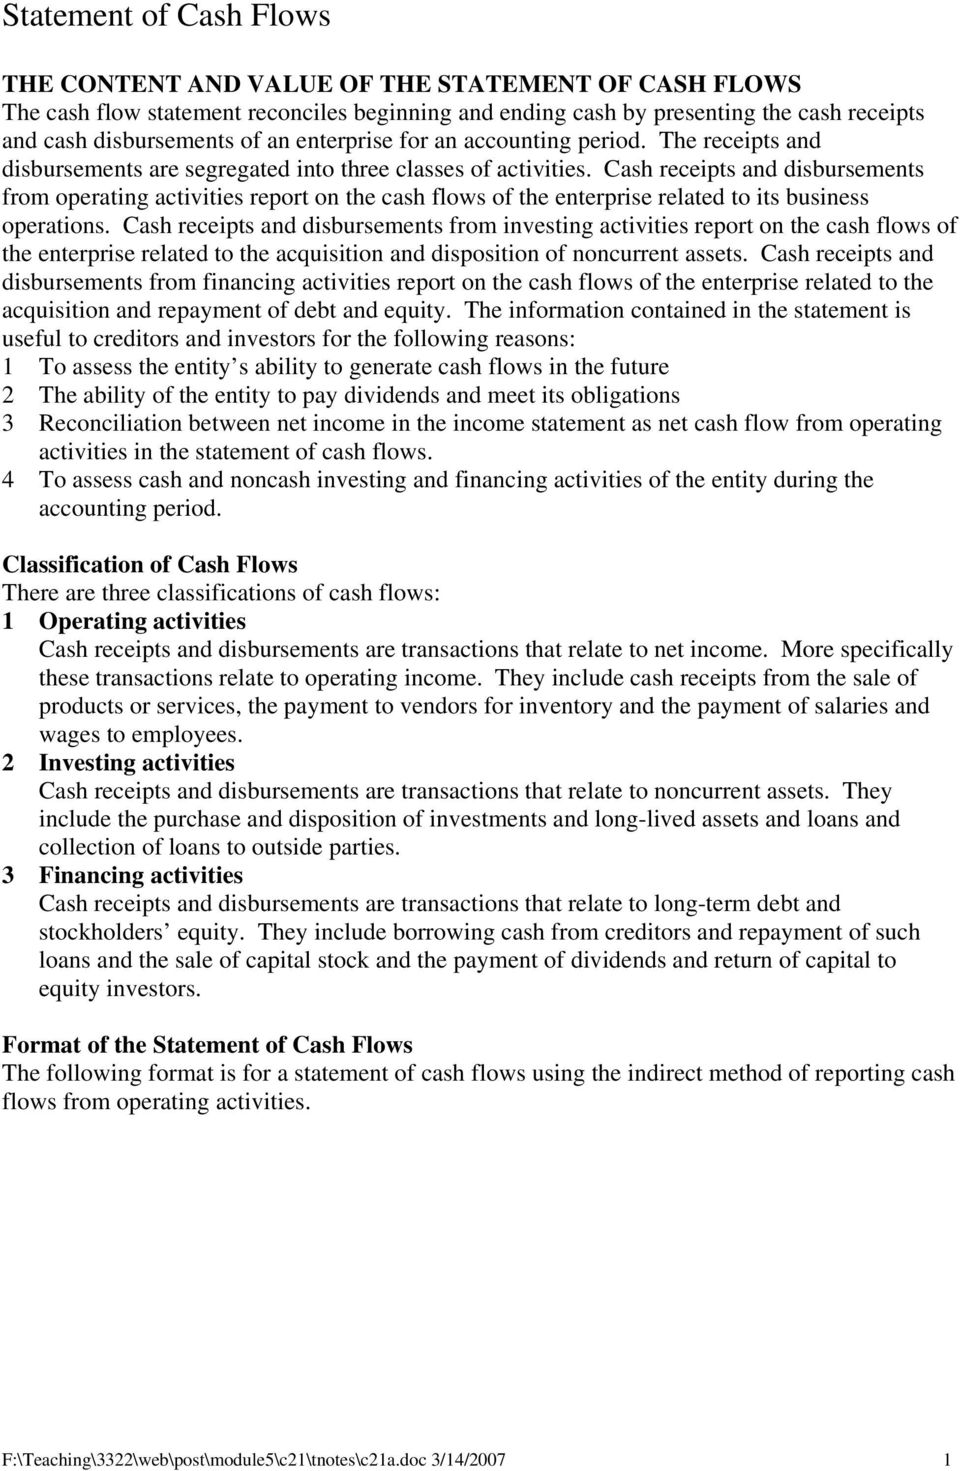 Cash receipts and disbursements from operating activities report on the cash flows of the enterprise related to its business operations.